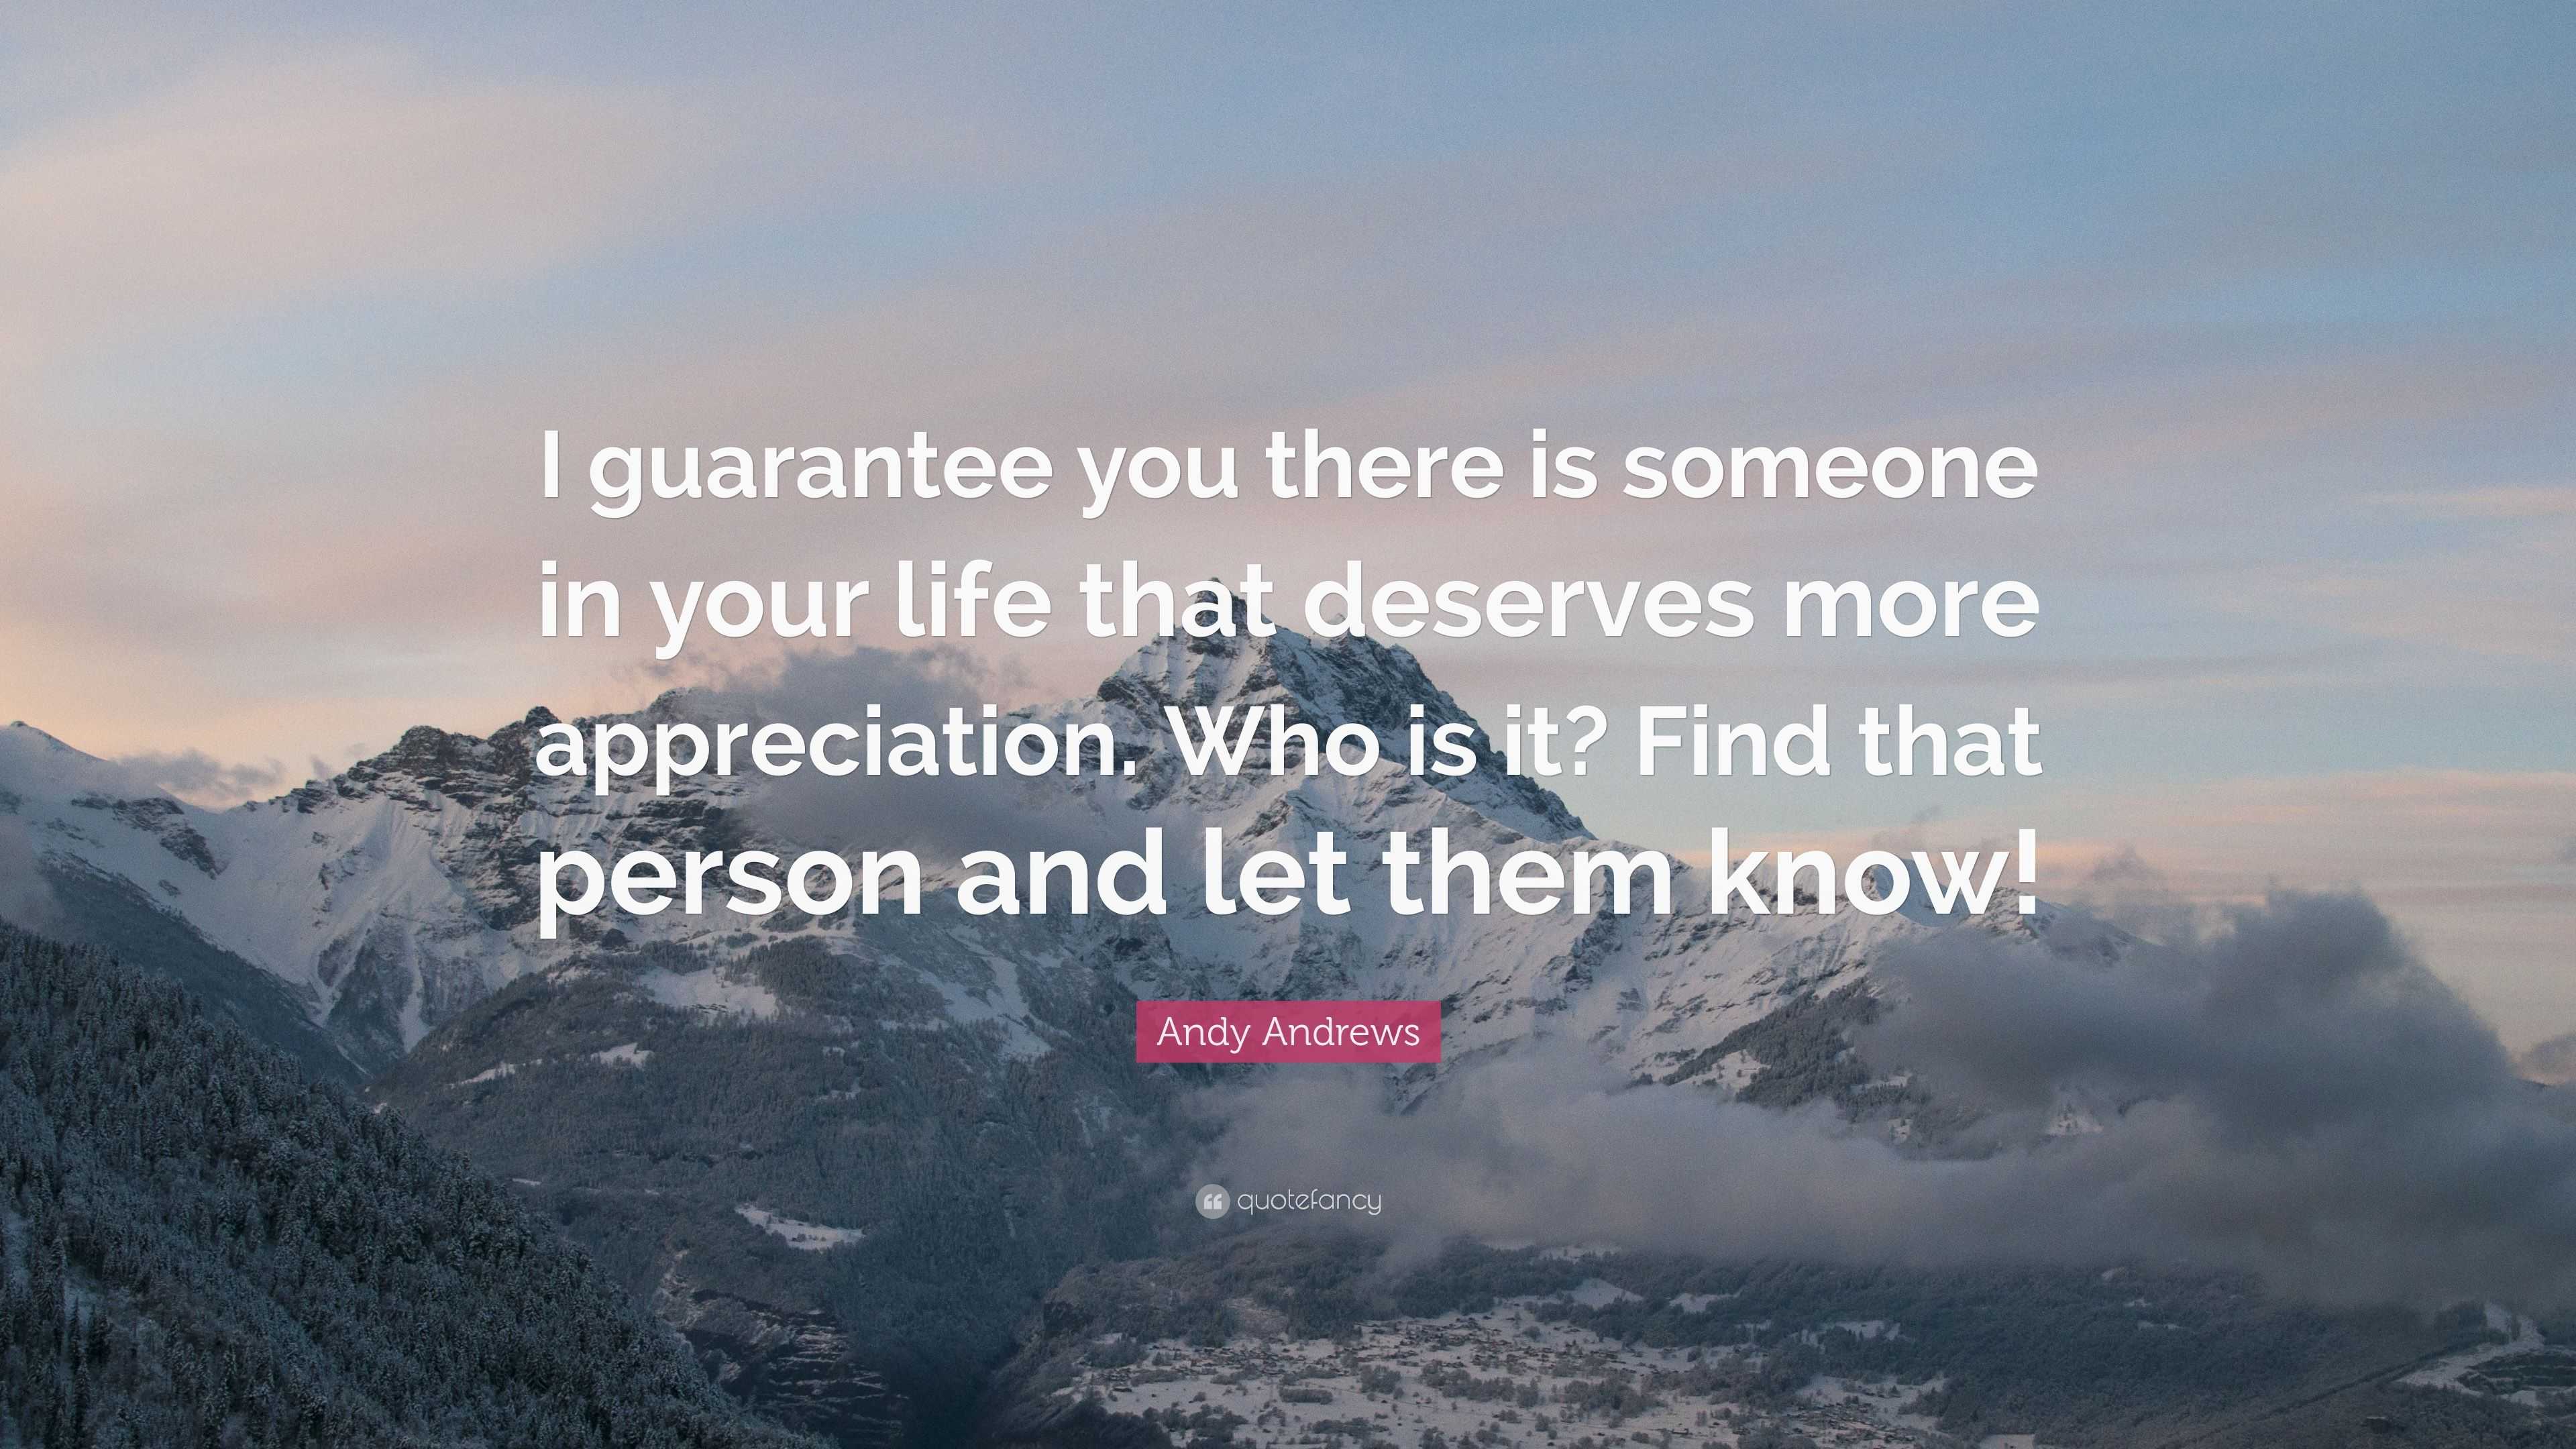 Andy Andrews Quote “I guarantee you there is someone in your life that deserves